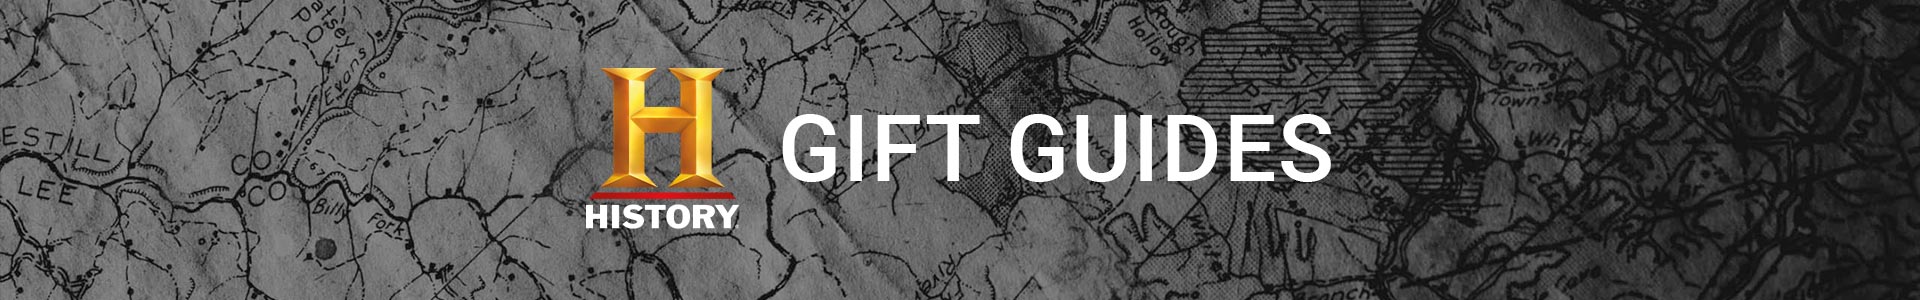 Gift Guides banner